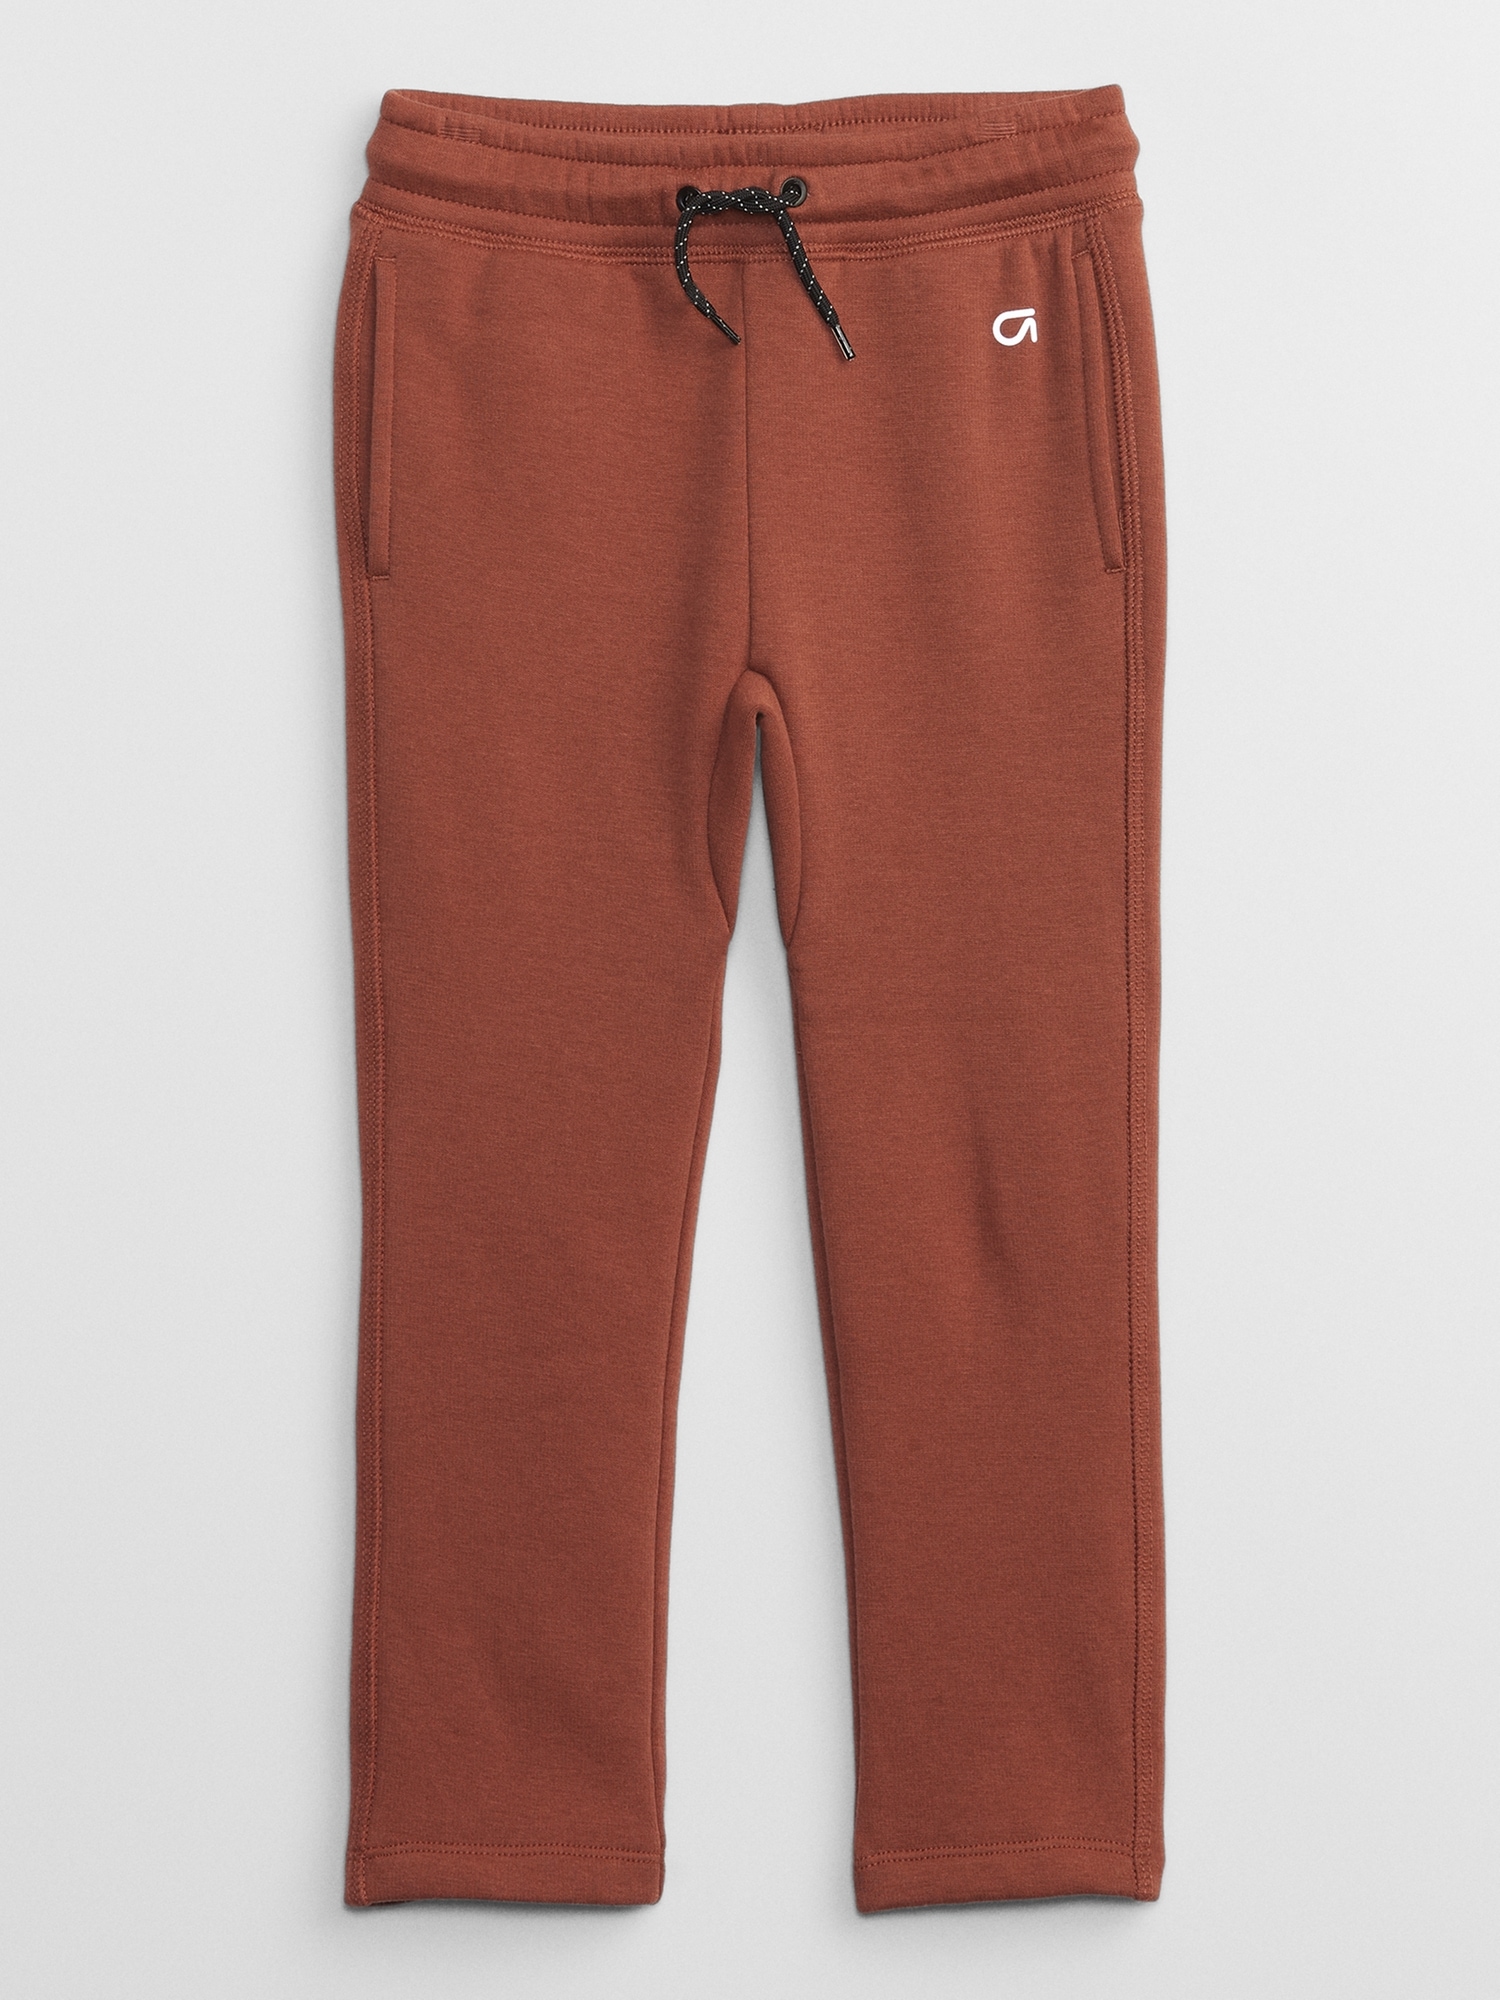 Fleece Lined Pants China Trade,Buy China Direct From Fleece Lined Pants  Factories at